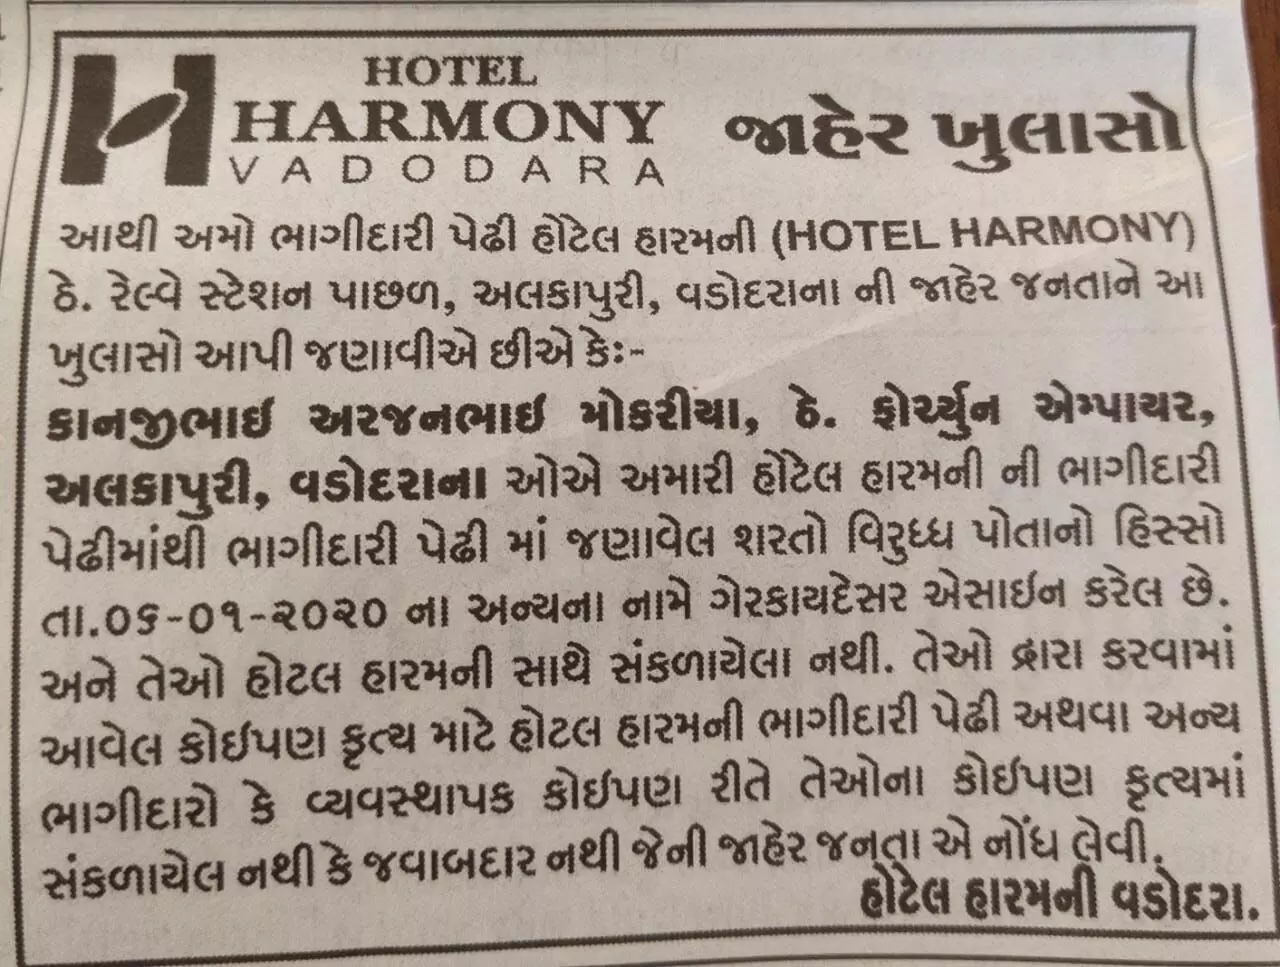 Arrested in Gotri rape case Kanji Mokaria not associated with them - Hotel Harmony made it public in newspapers